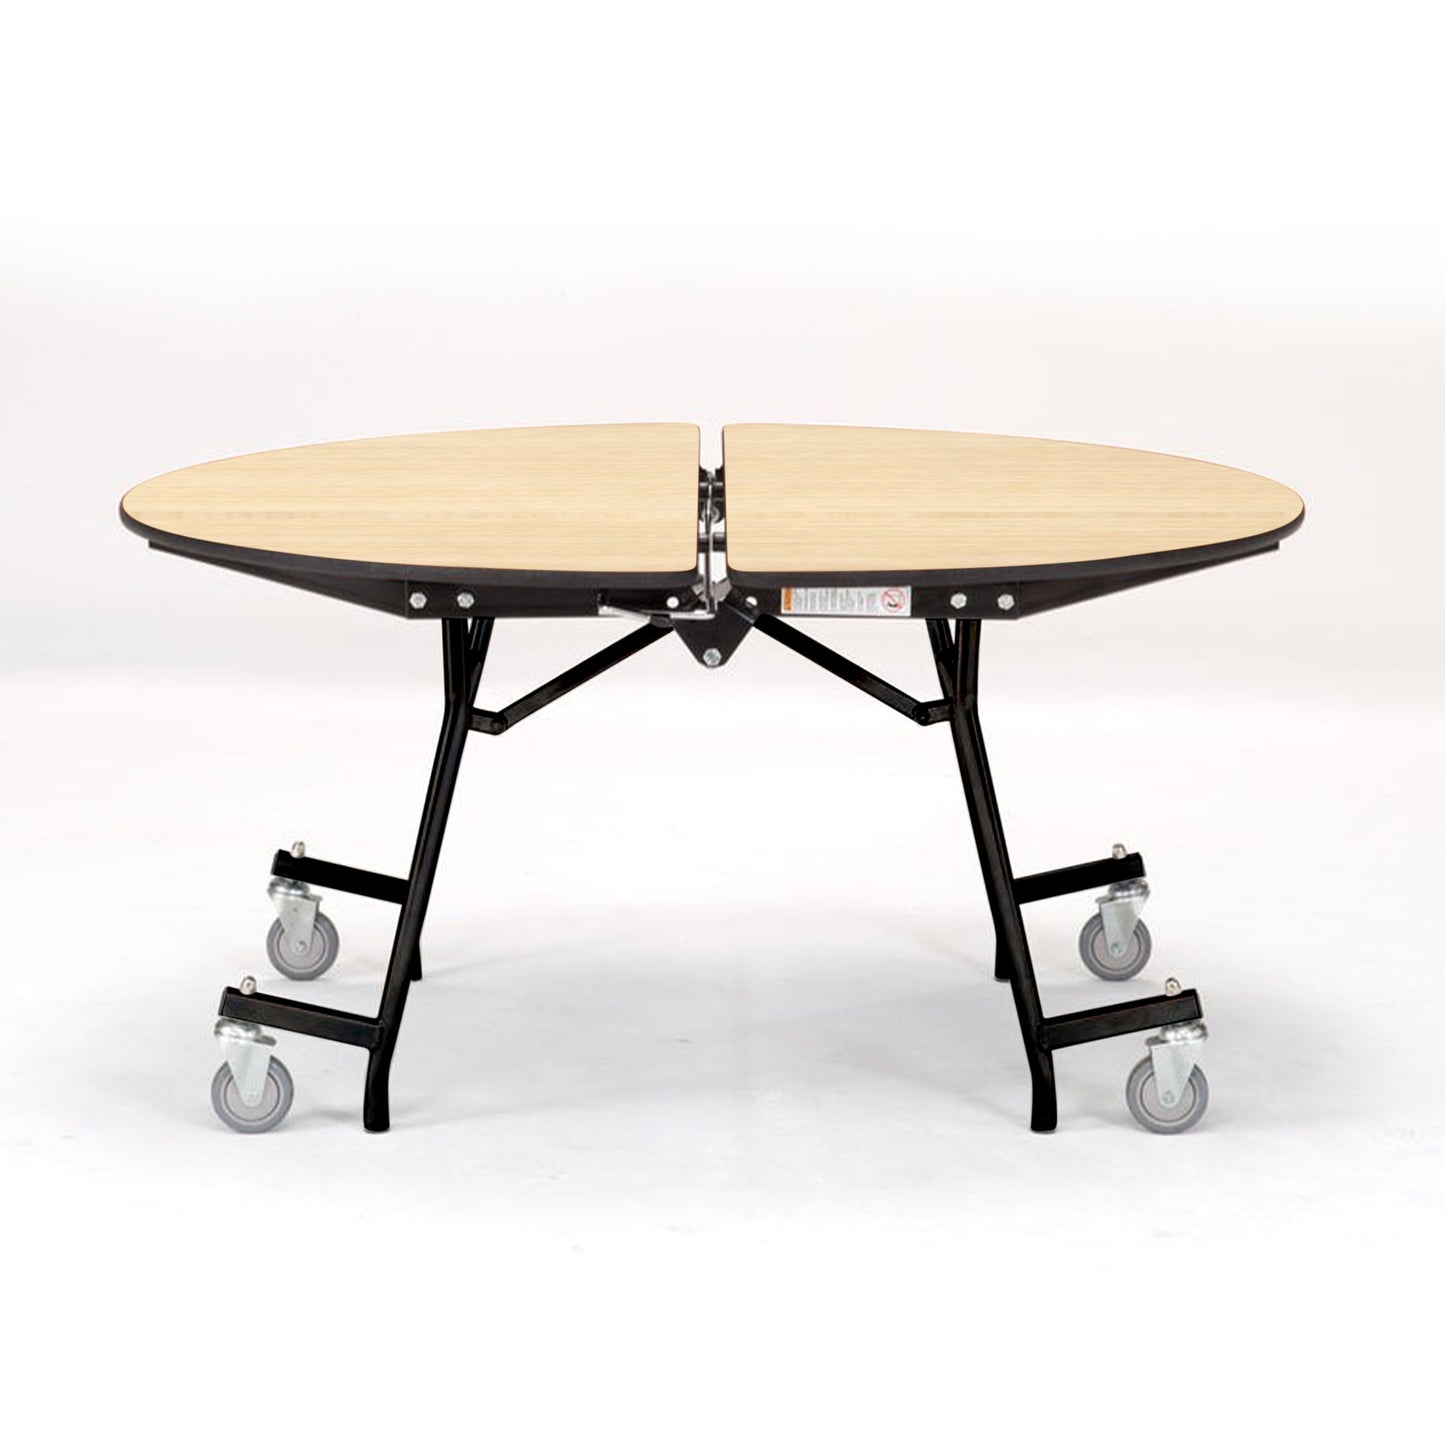 NPS Mobile Cafeteria Round Table Shape Unit - 72" W x 72" L (National Public Seating NPS-MT72R)